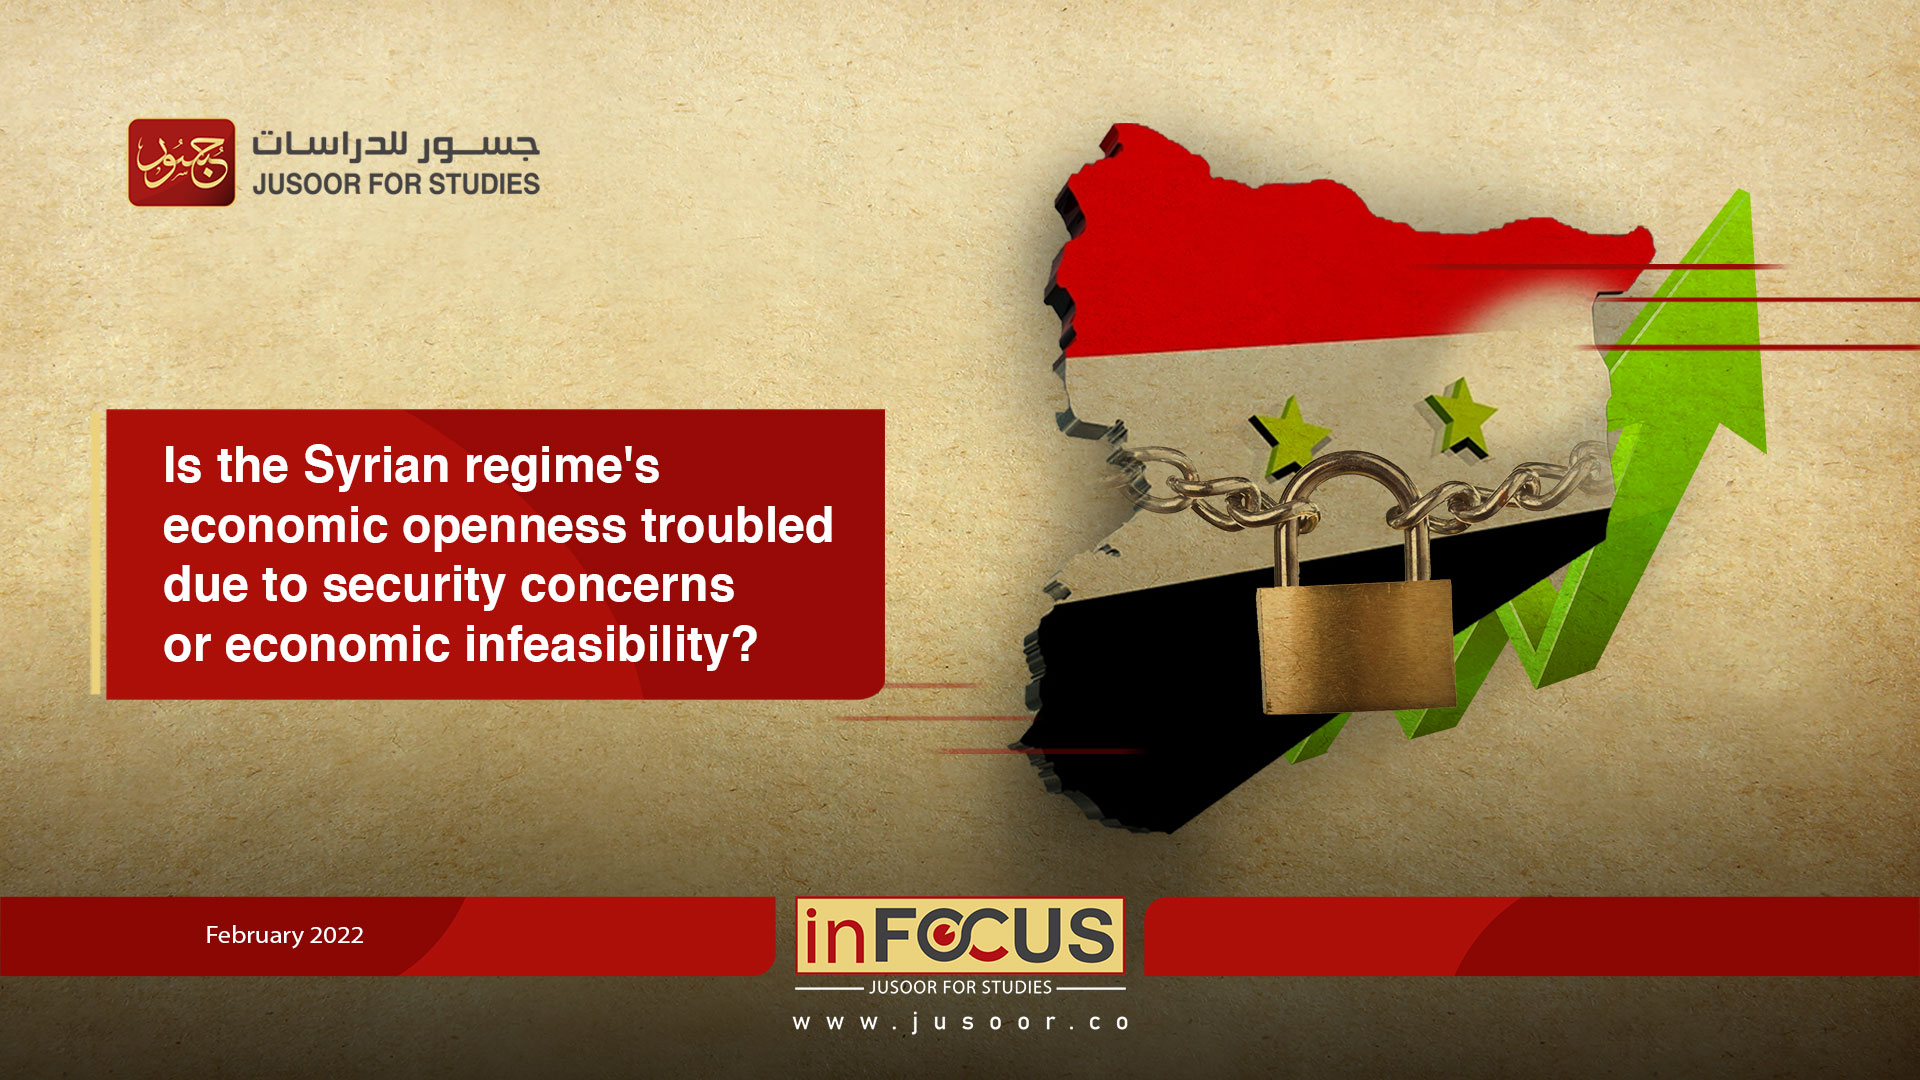 Is the Syrian regime's economic openness troubled due to security concerns or economic infeasibility?